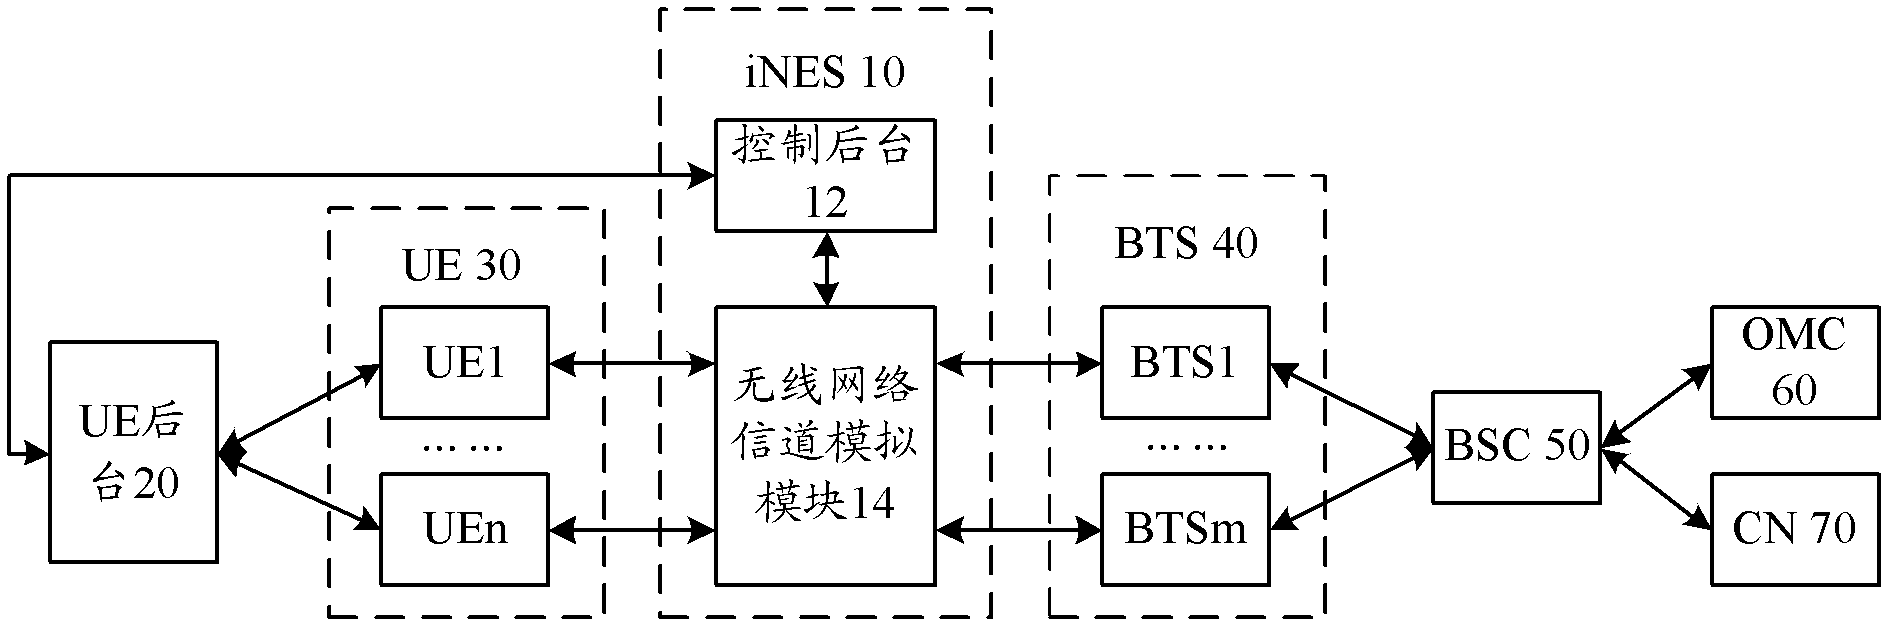 Wireless network channel simulator as well as system and method for testing wireless network equipment